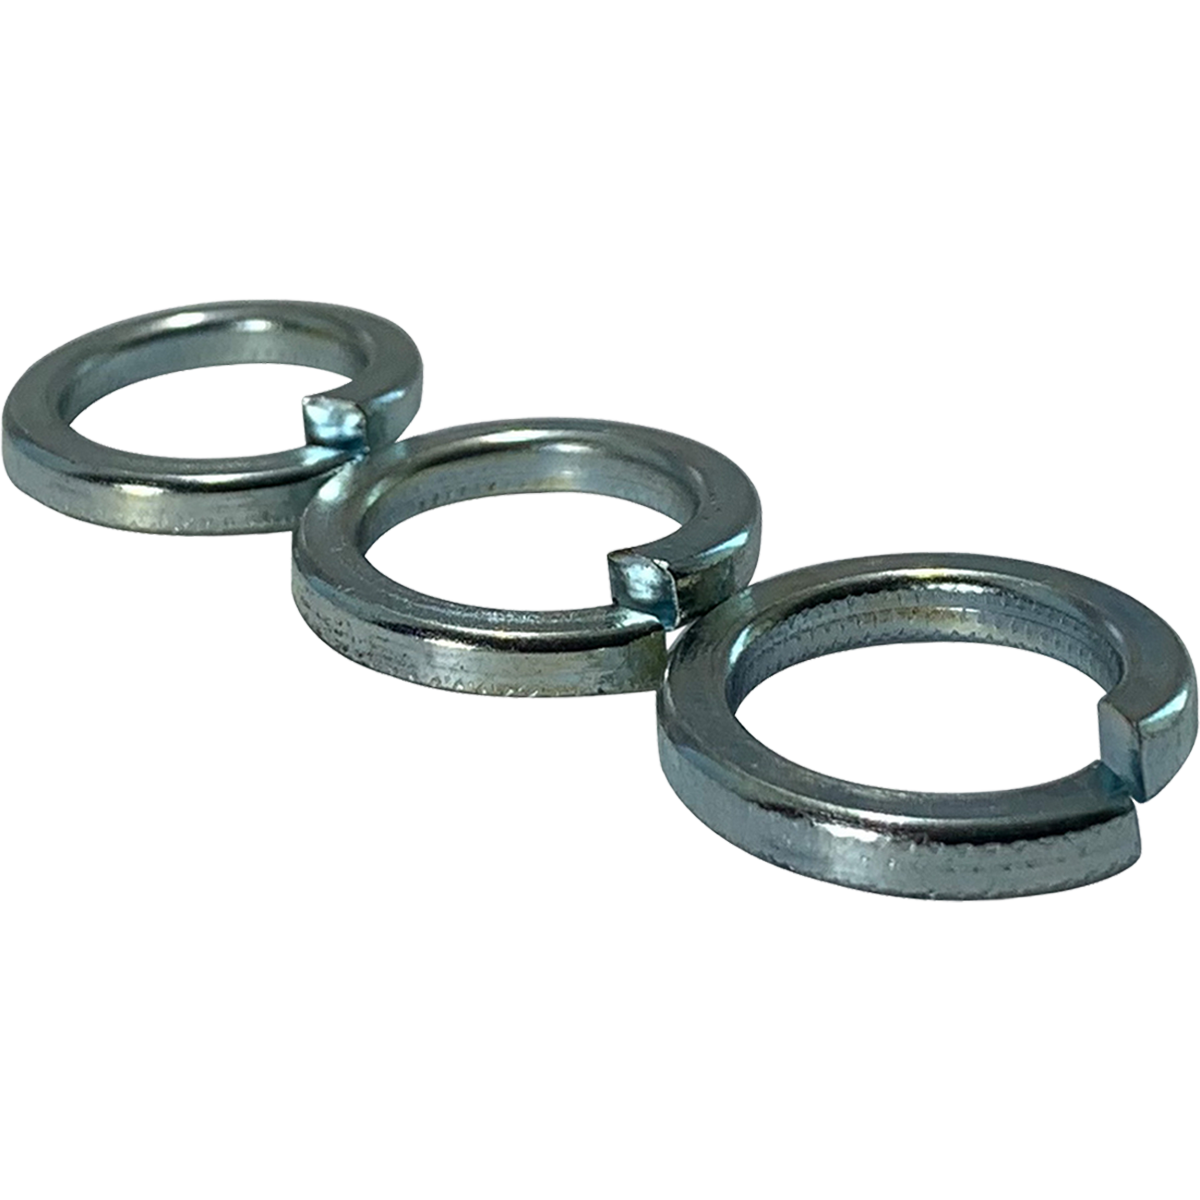 Metric, Square Spring Lock Washers, manufactured from grade 4.6 steel with a bright zinc plating (BZP). Available in various diameters and at competitive prices. 